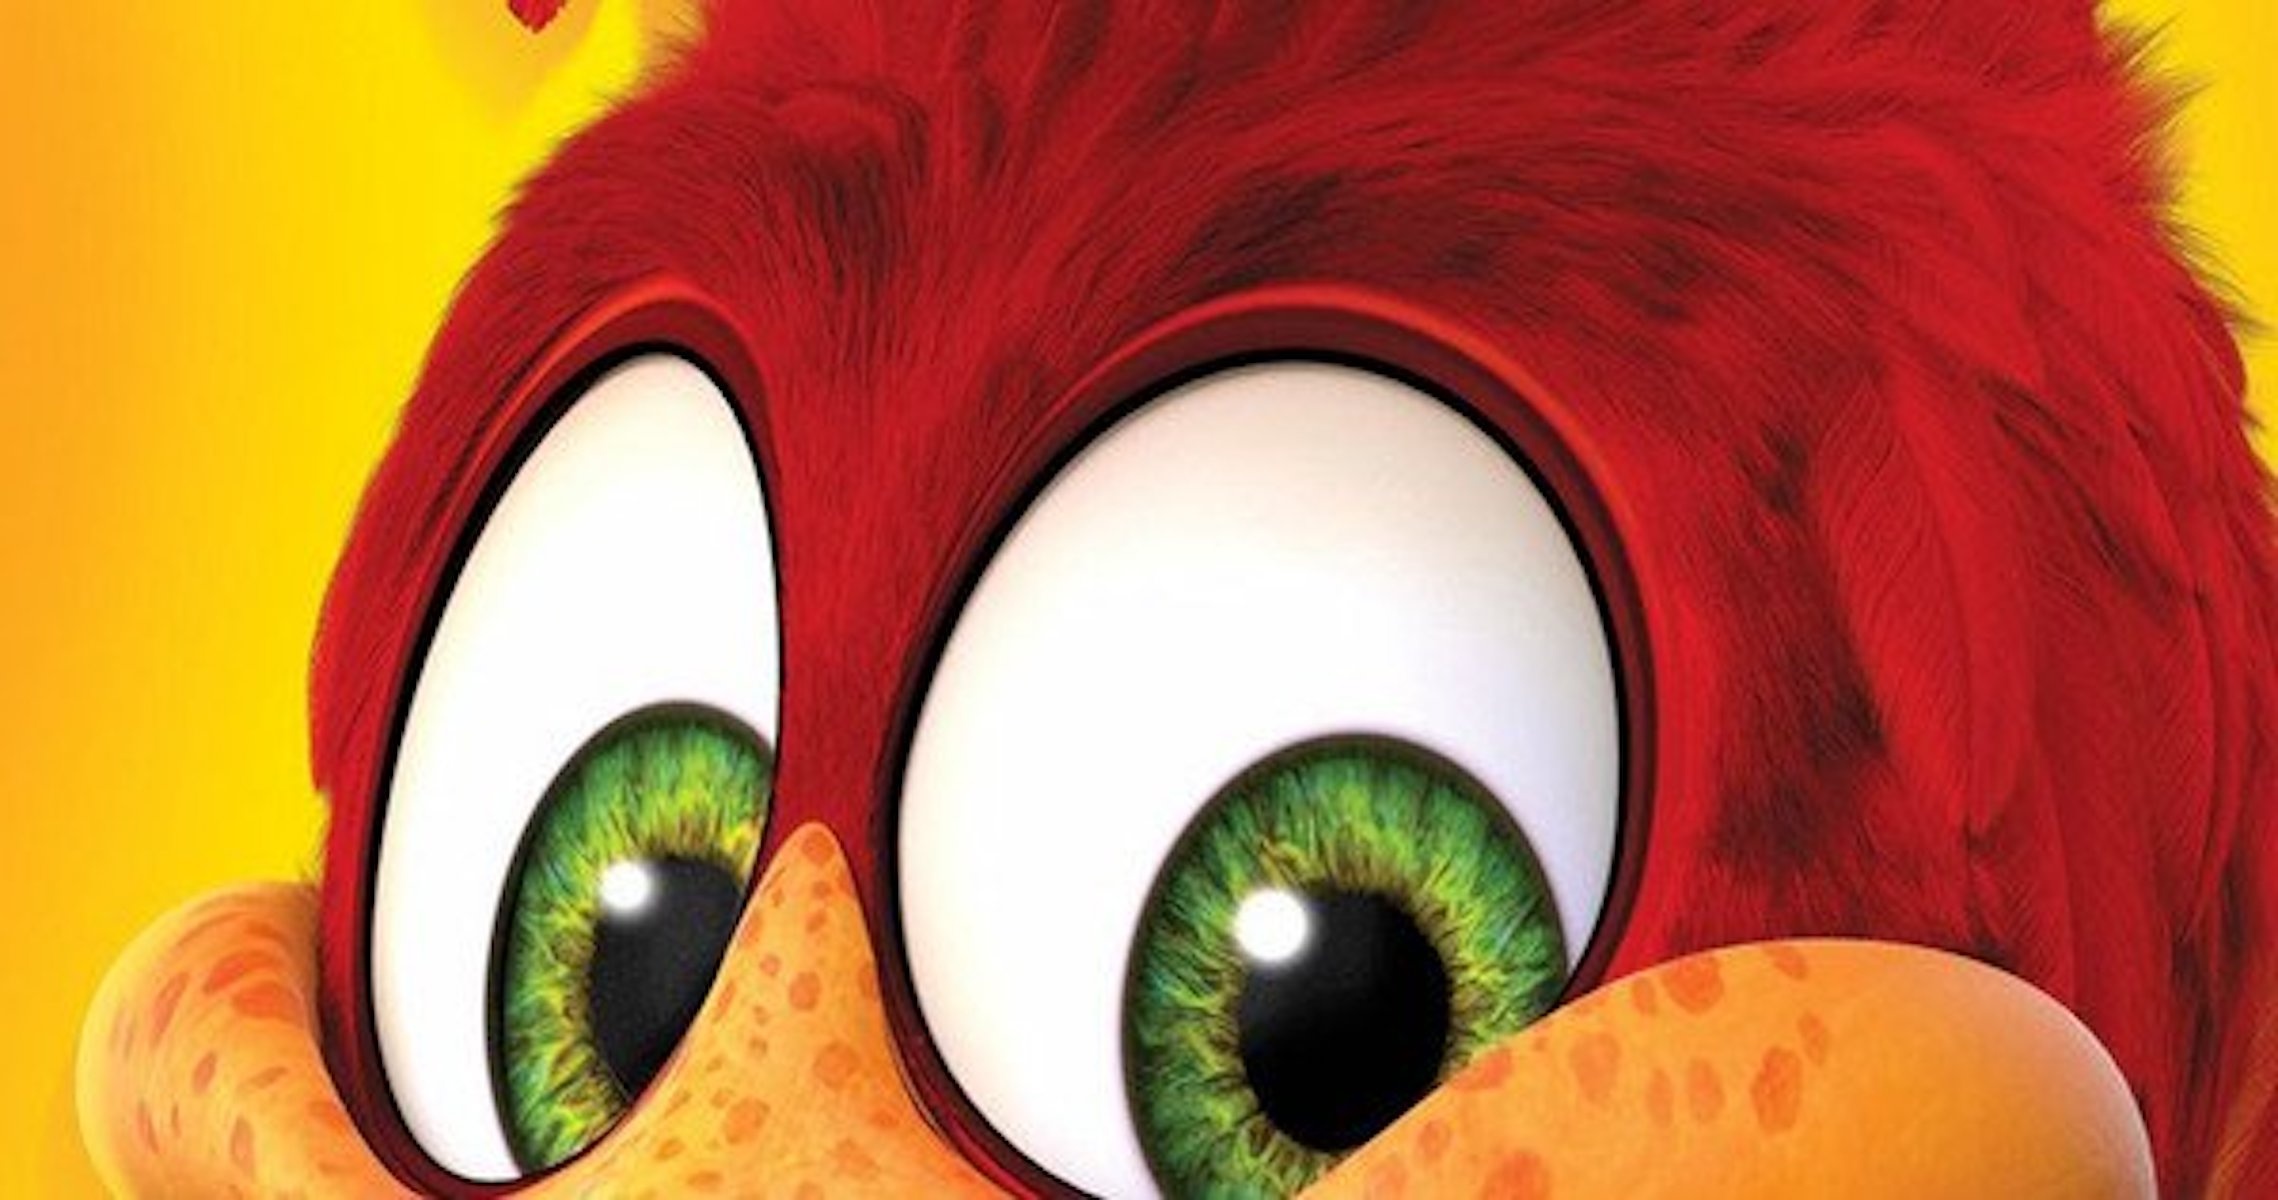 Woody Woodpecker, Scary trailer, Horror movie vibes, Animated character, 2280x1200 HD Desktop